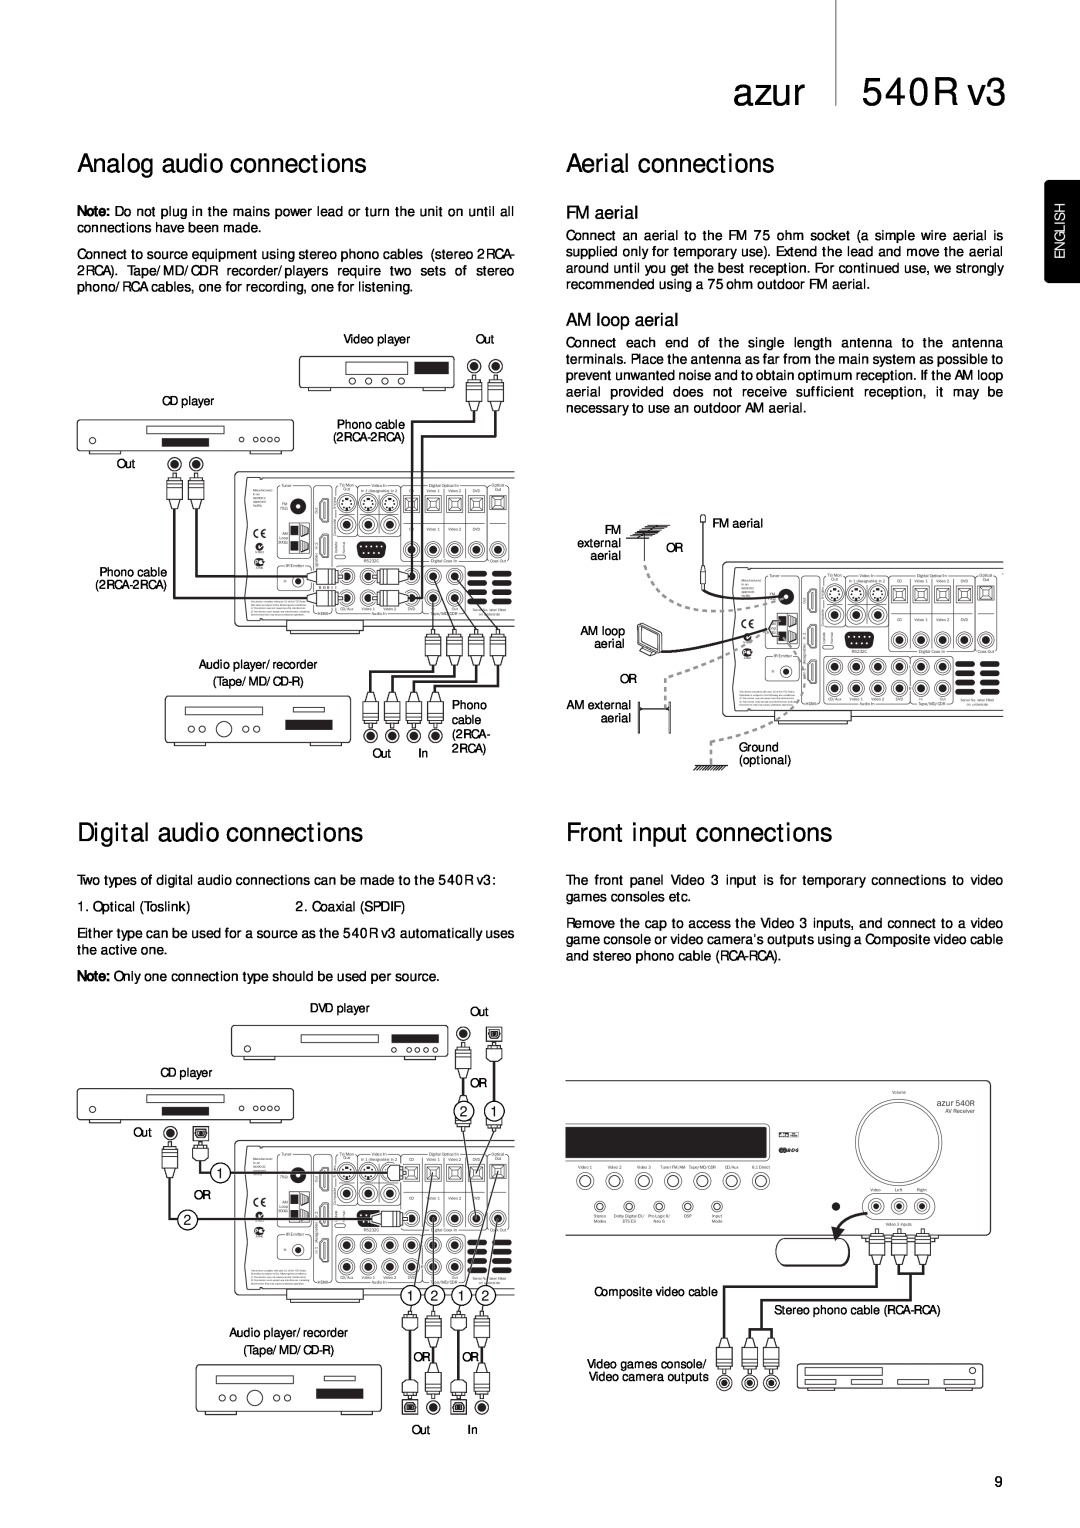 Cambridge Audio 540R V3 Analog audio connections, Aerial connections, Digital audio connections, Front input connections 